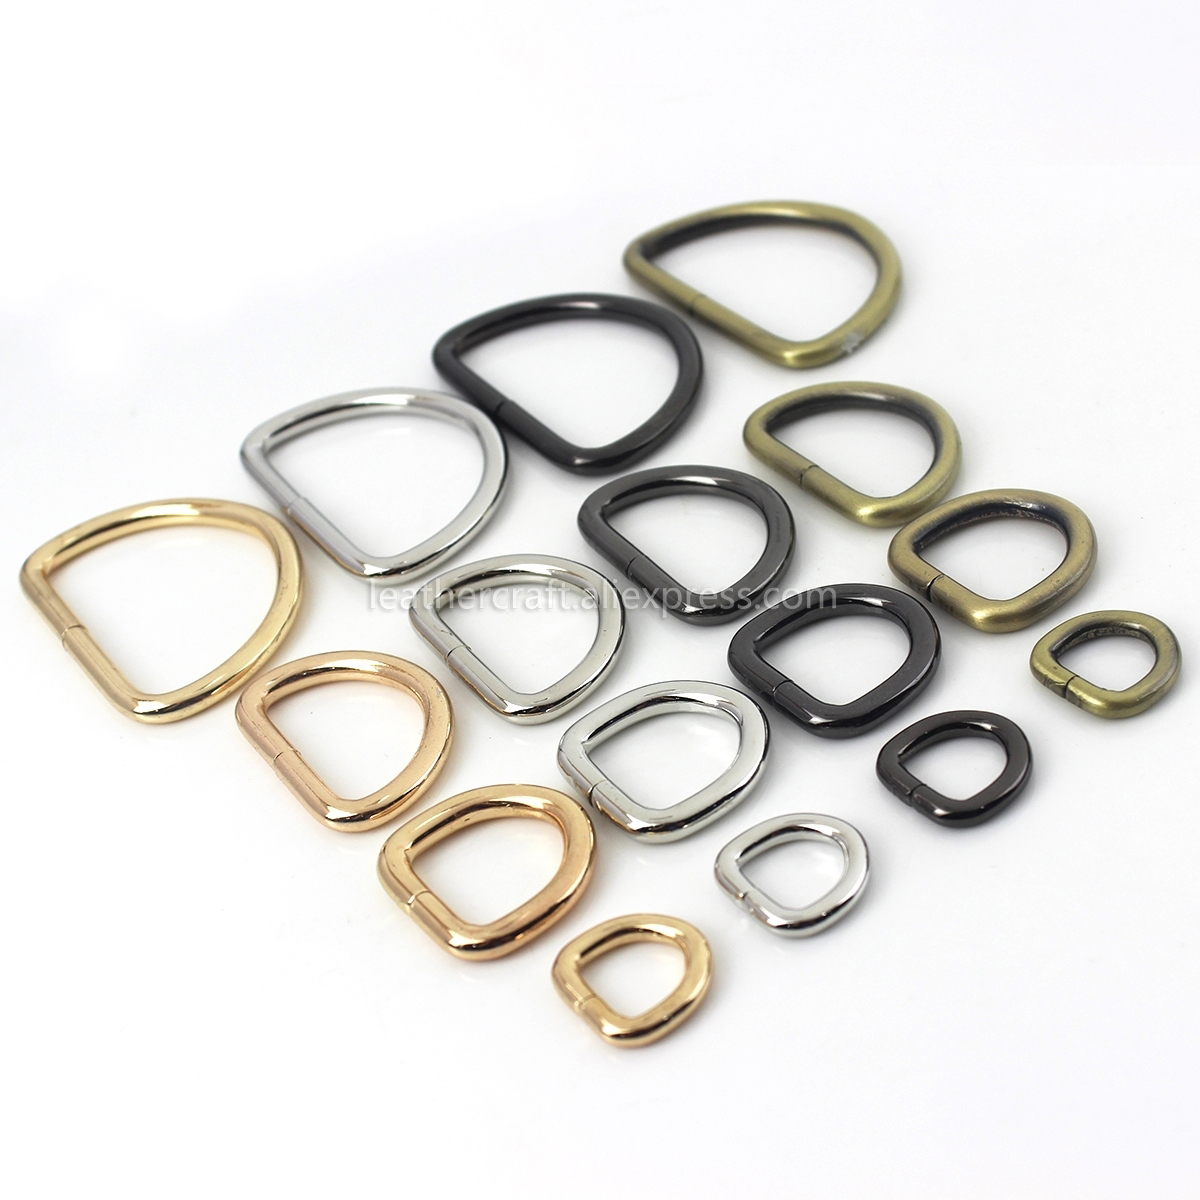 

1pcs 4/8"~2" Metal Dee D Ring Buckle for Webbing Backpack Bag Parts Leather Craft Strap Belt Purse Pet Collar Clasp High Quality